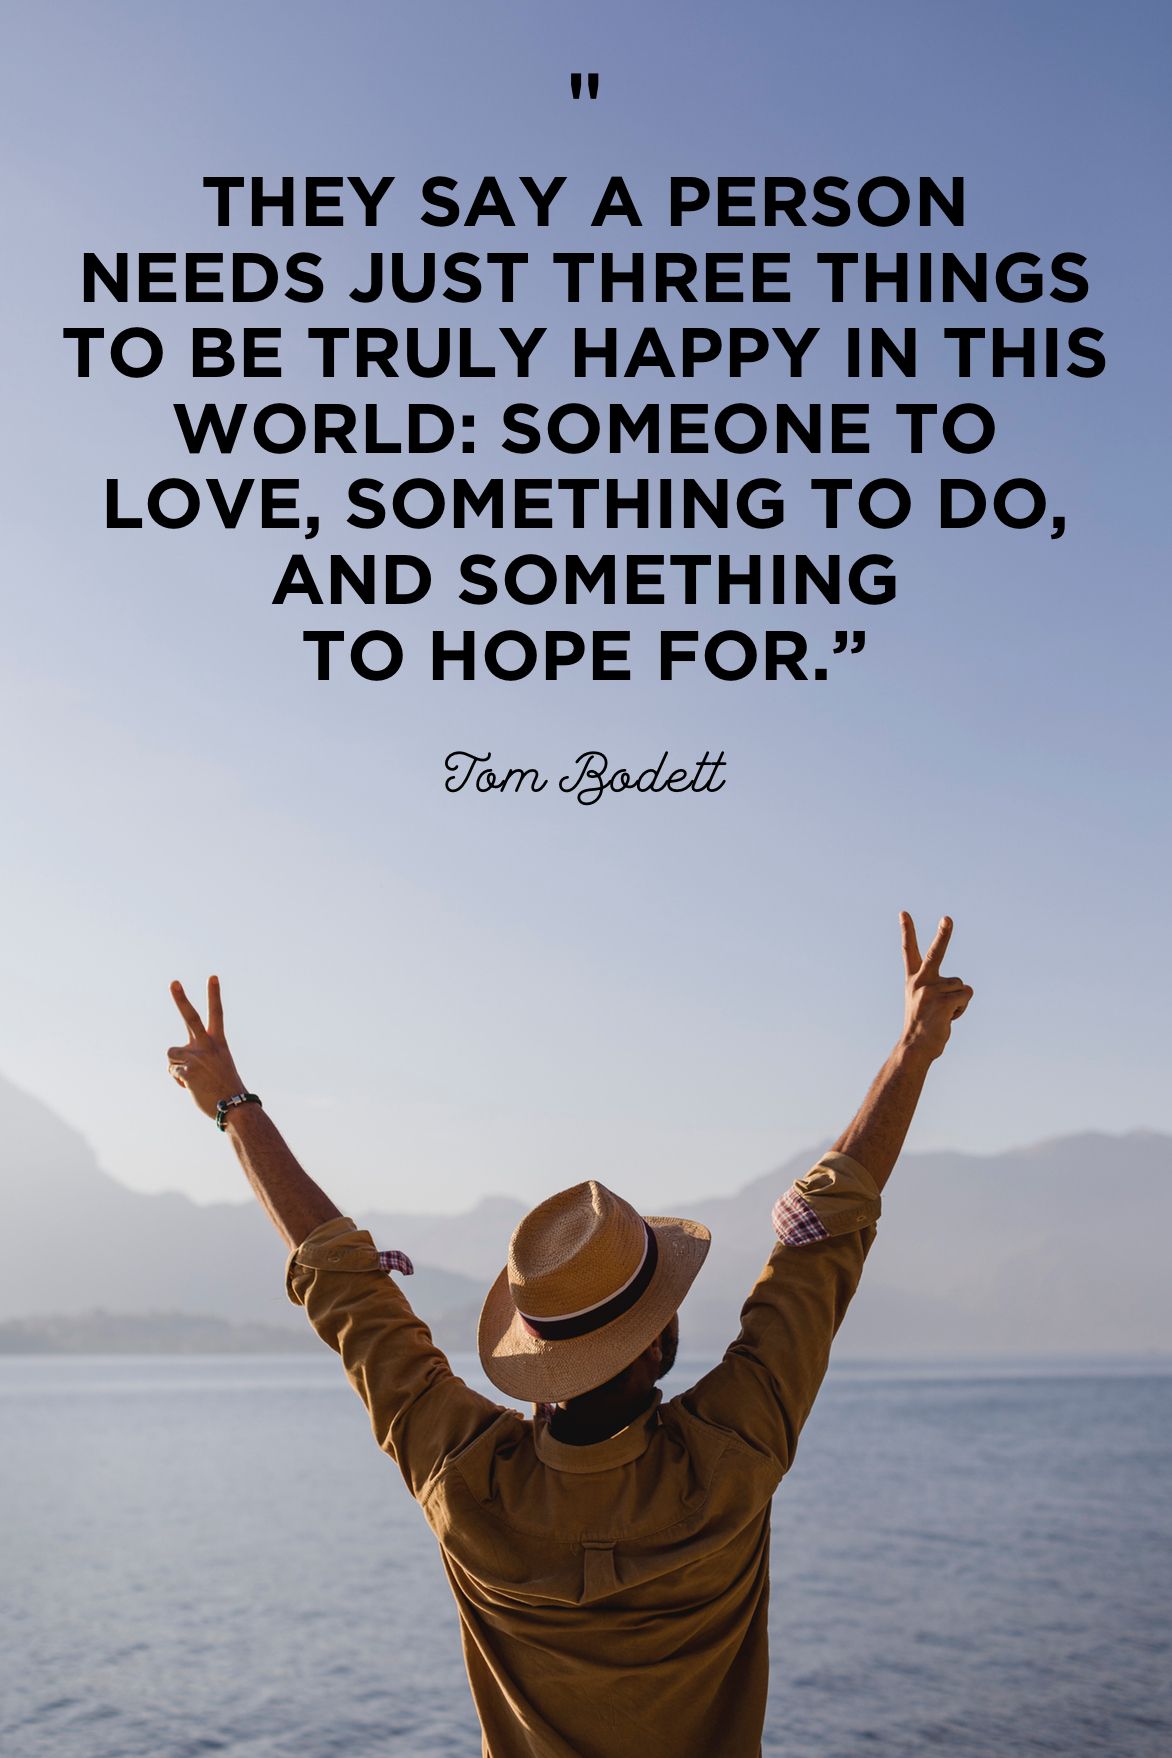 quotes about staying happy